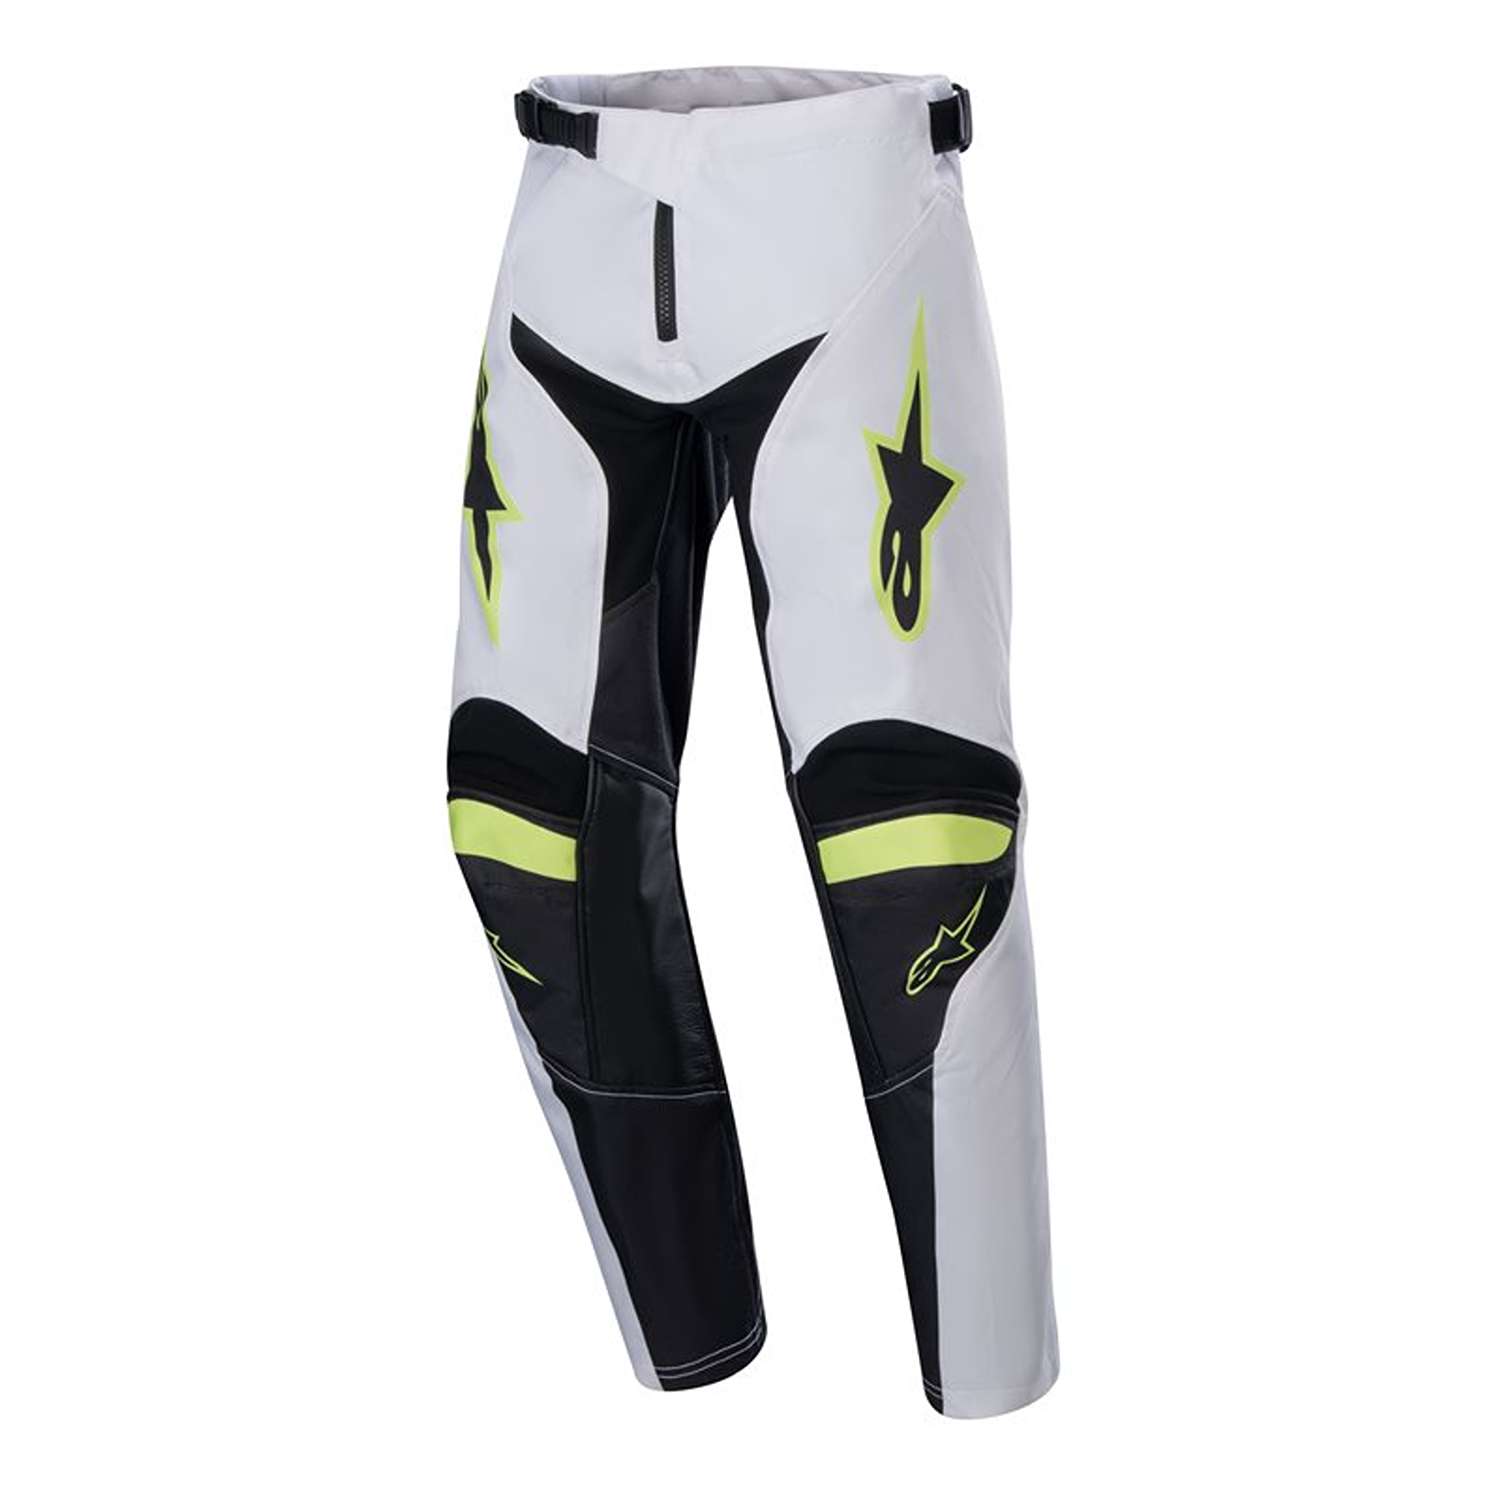 Image of Alpinestars Youth Racer Lucent Pants White Neon Red Yellow Fluo Size 26 EN